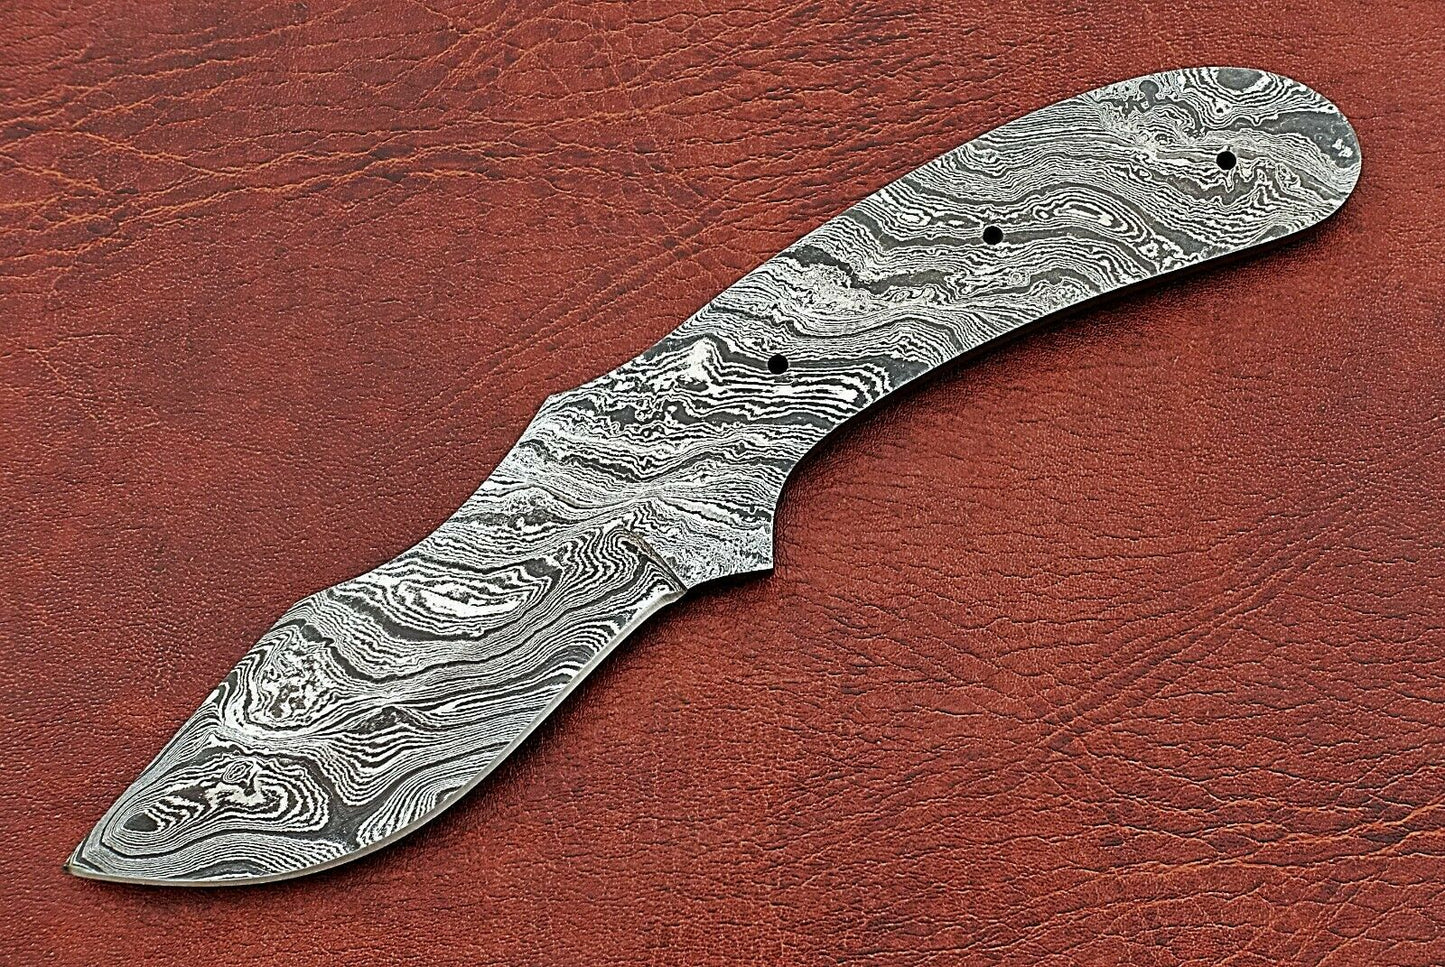 Clip point blank blade 8" hand forged Damascus steel knife, 3.5" Cutting edge